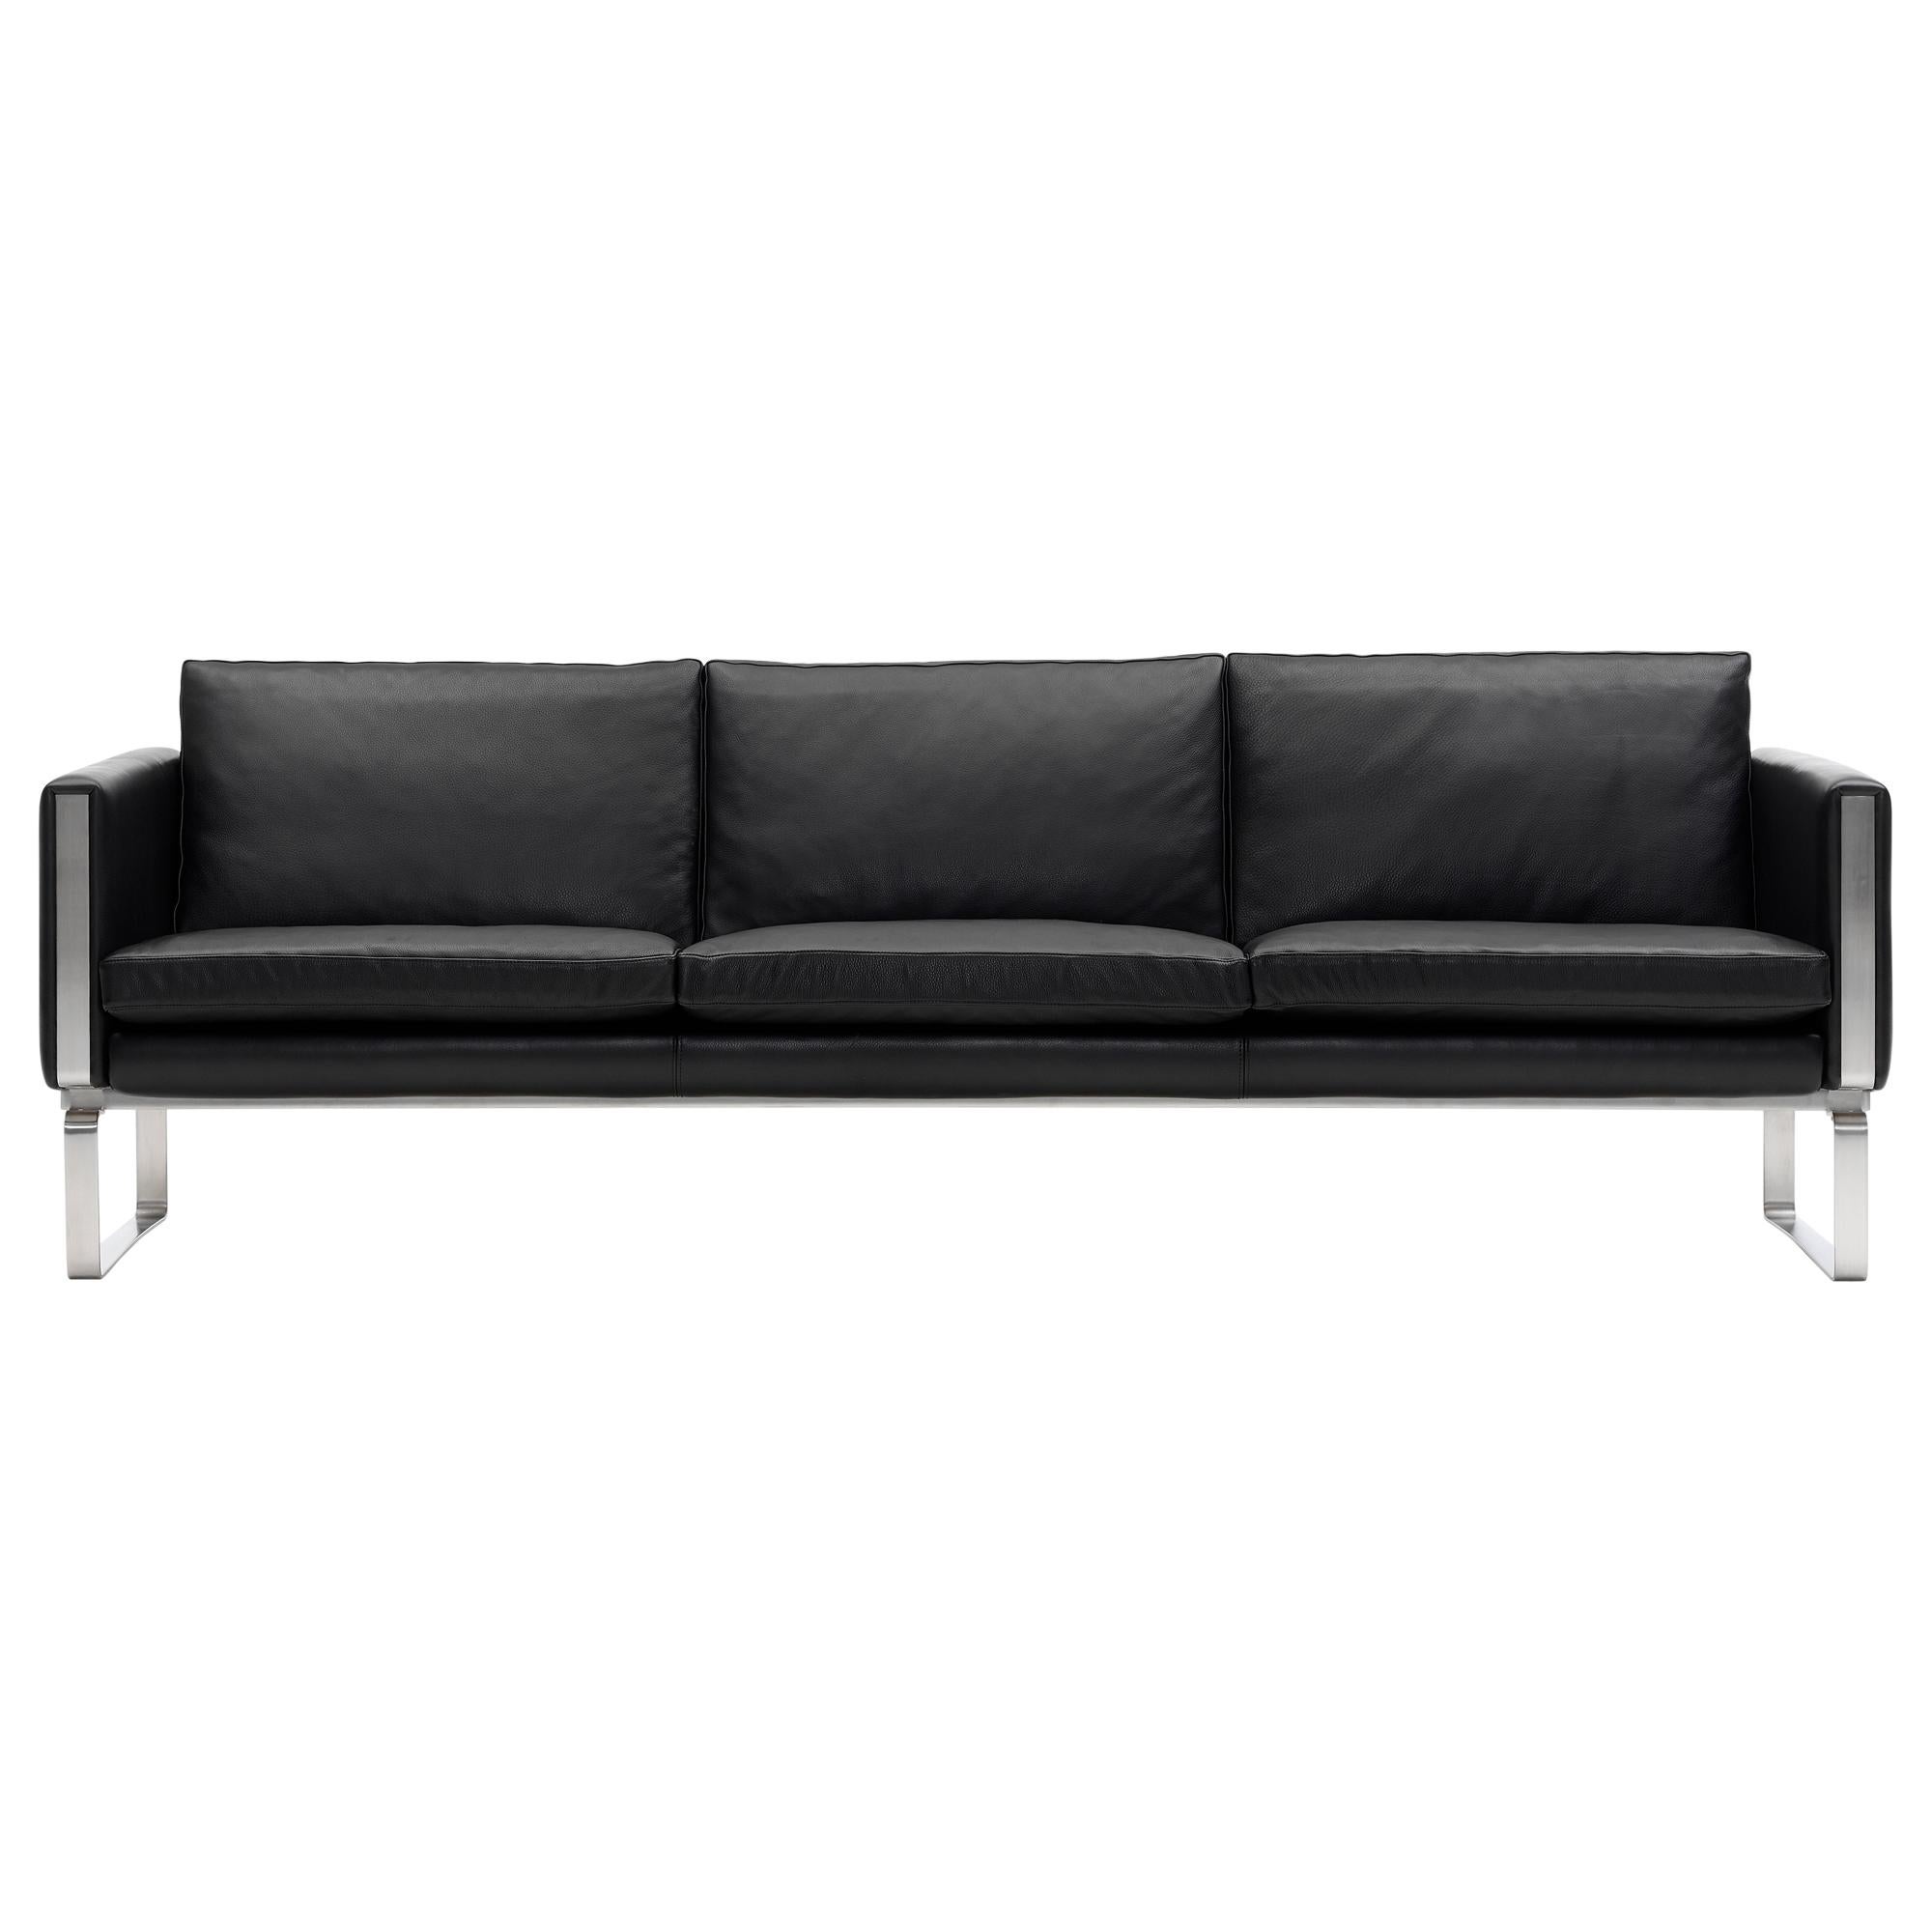 CH103 3-Seat Sofa in Stainless Steel Frame with Leather Seat by Hans J. Wegner